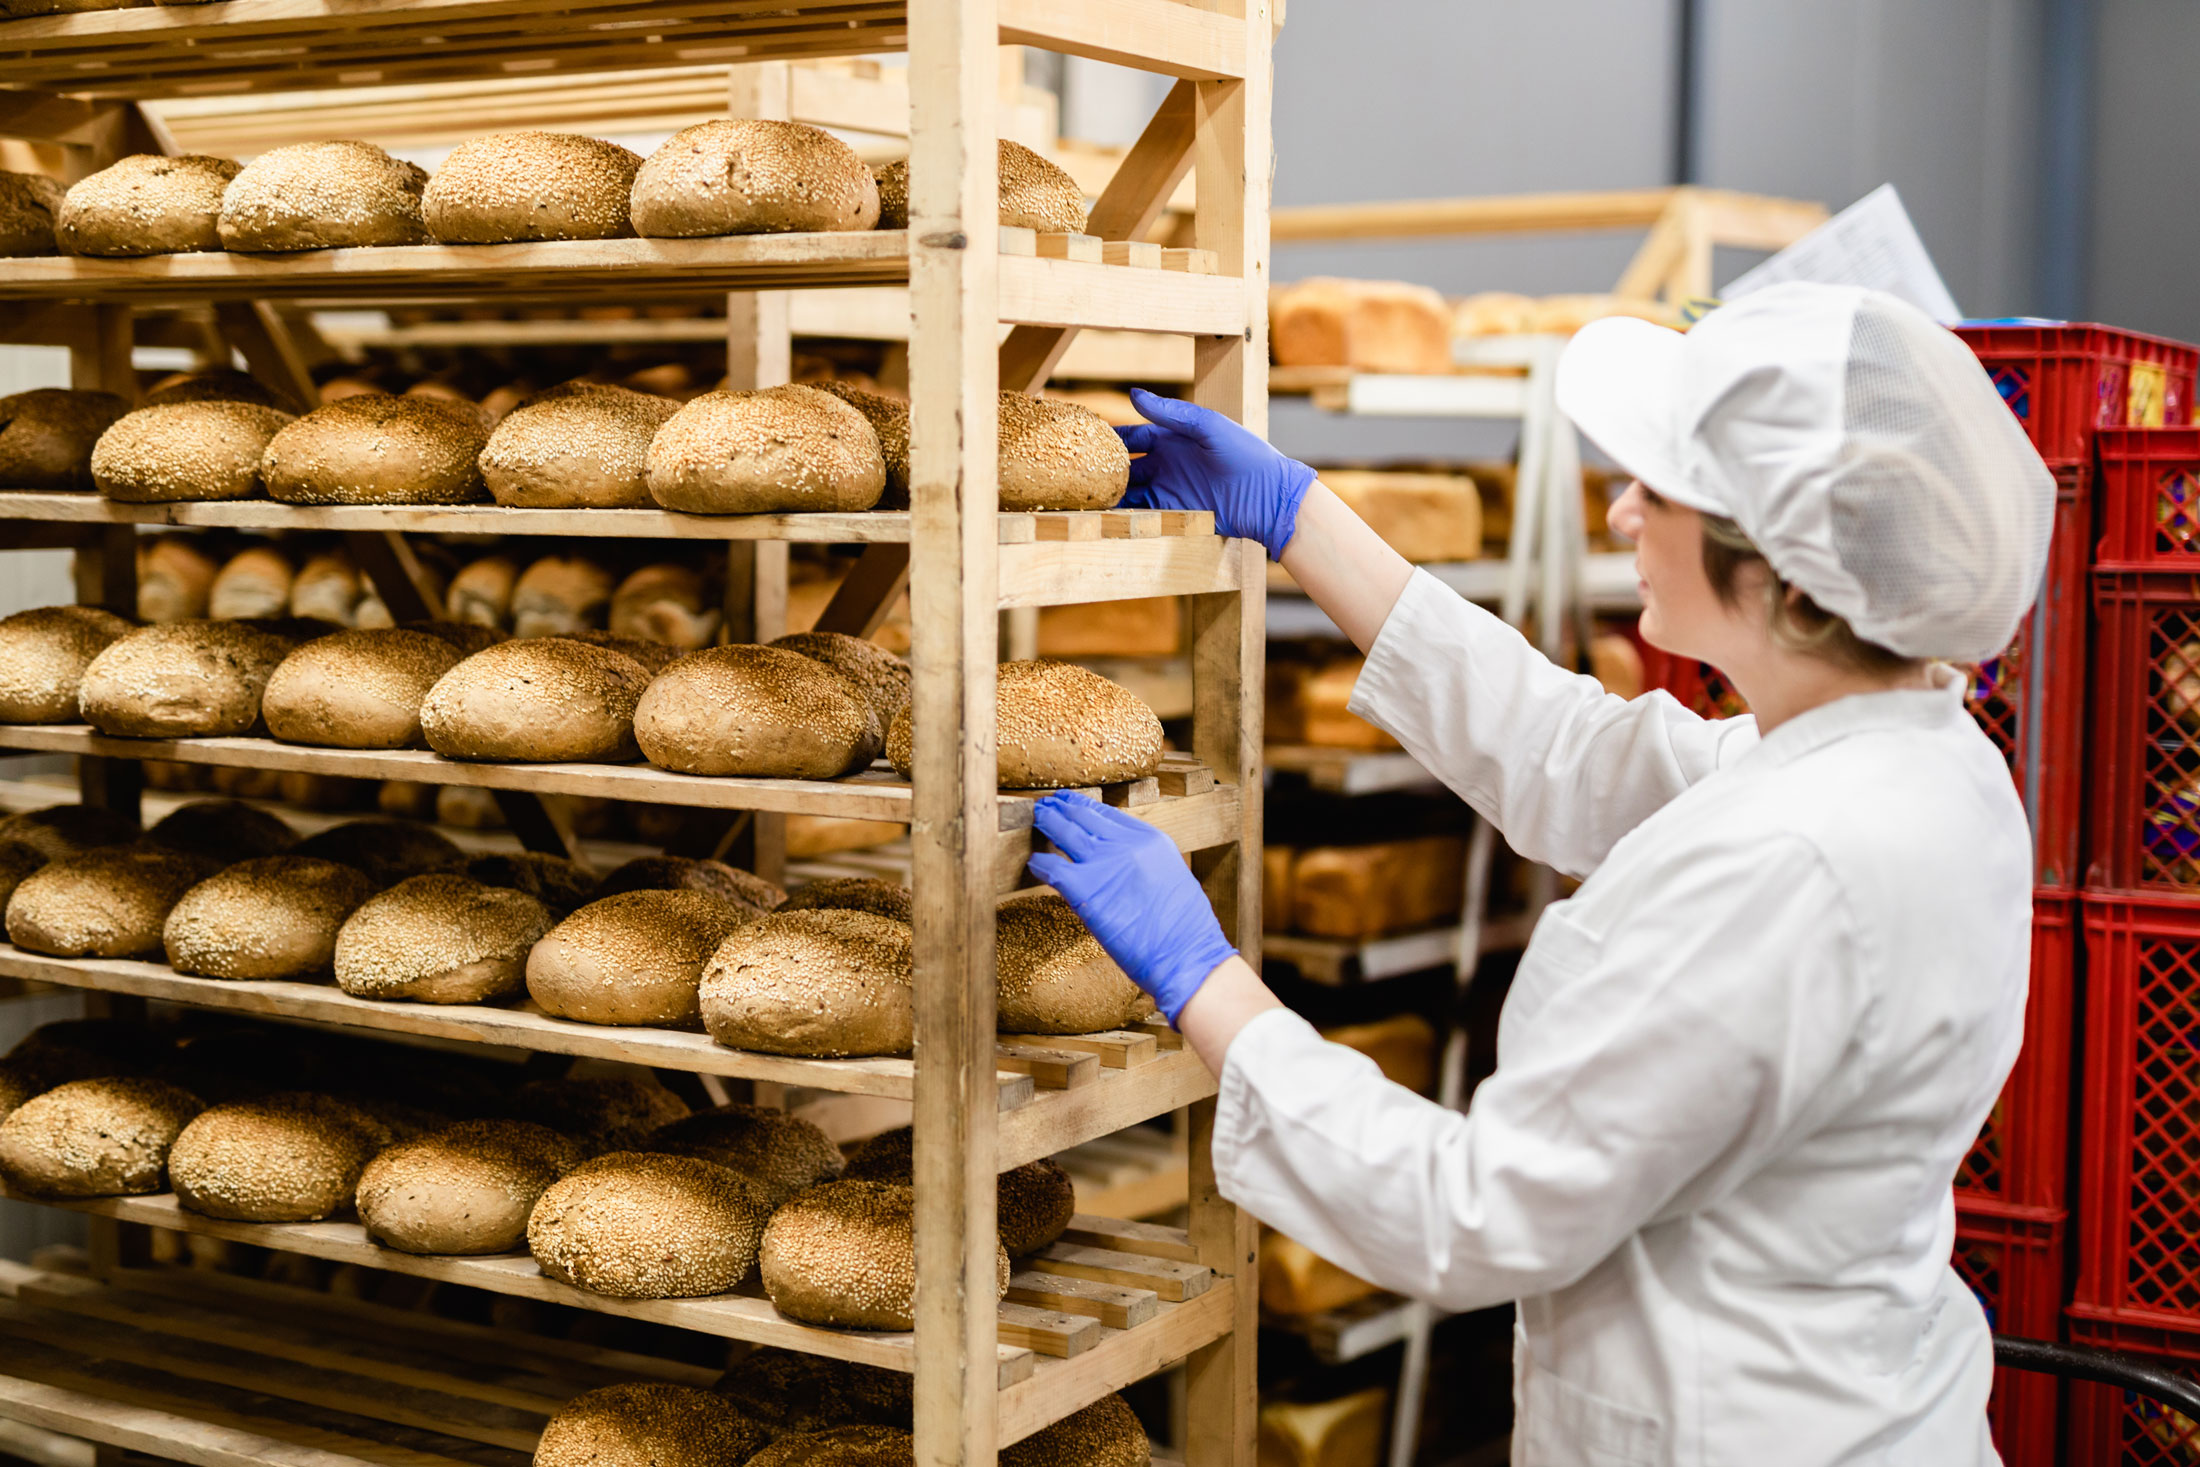 a woman organises a shelving unit filled with freshly baked bread